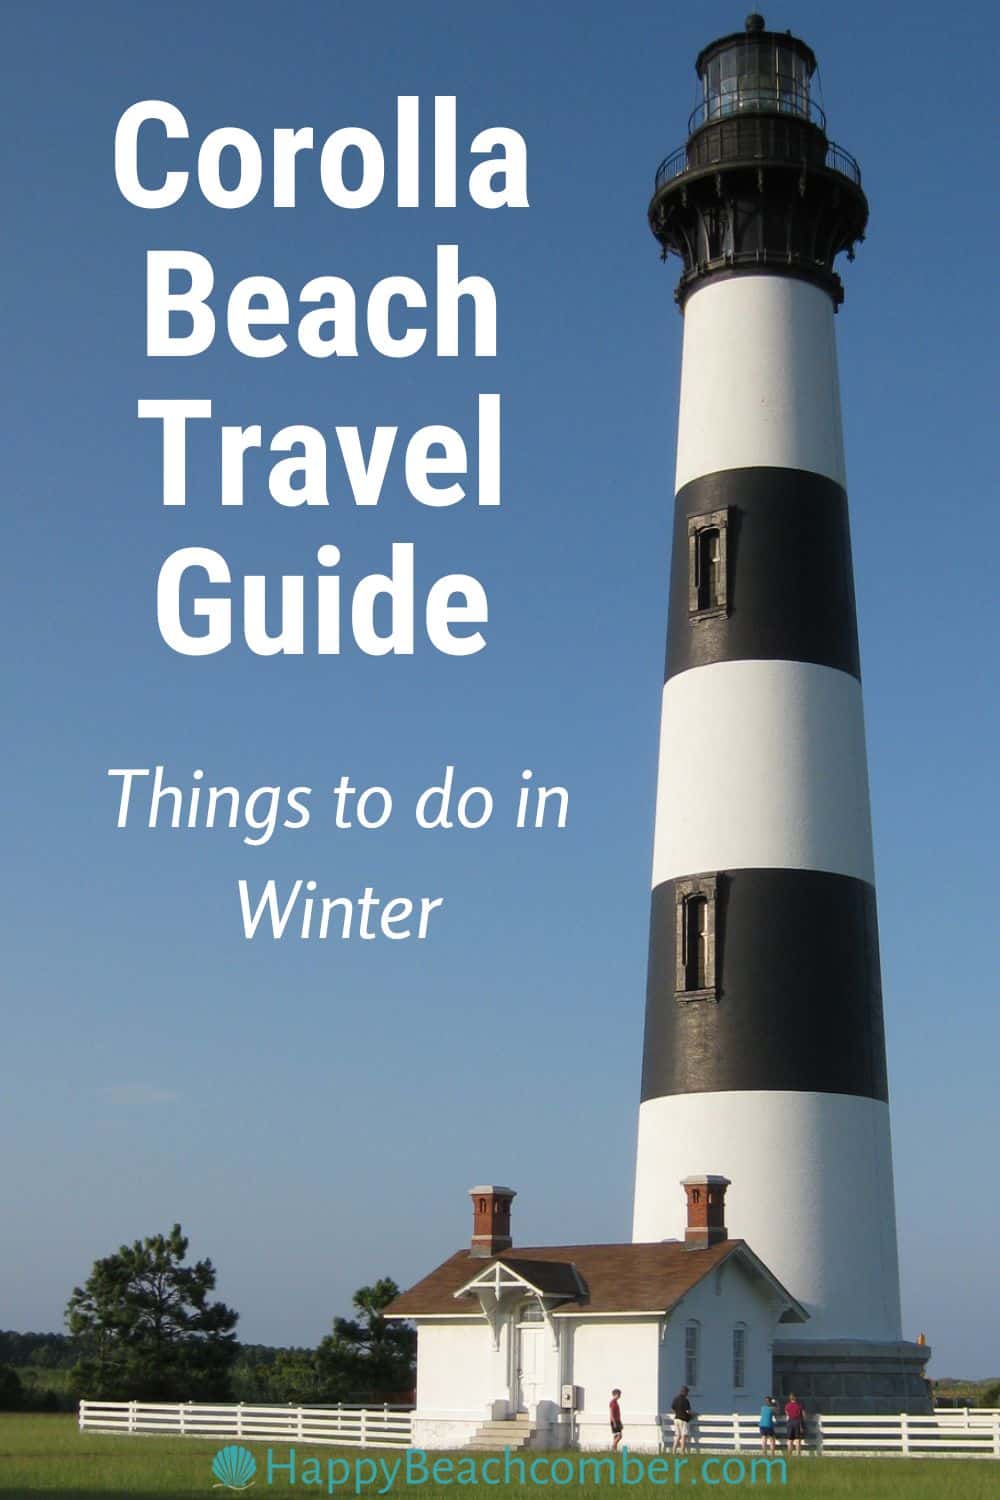 Corolla Beach Travel Guide - Things to do in Winter